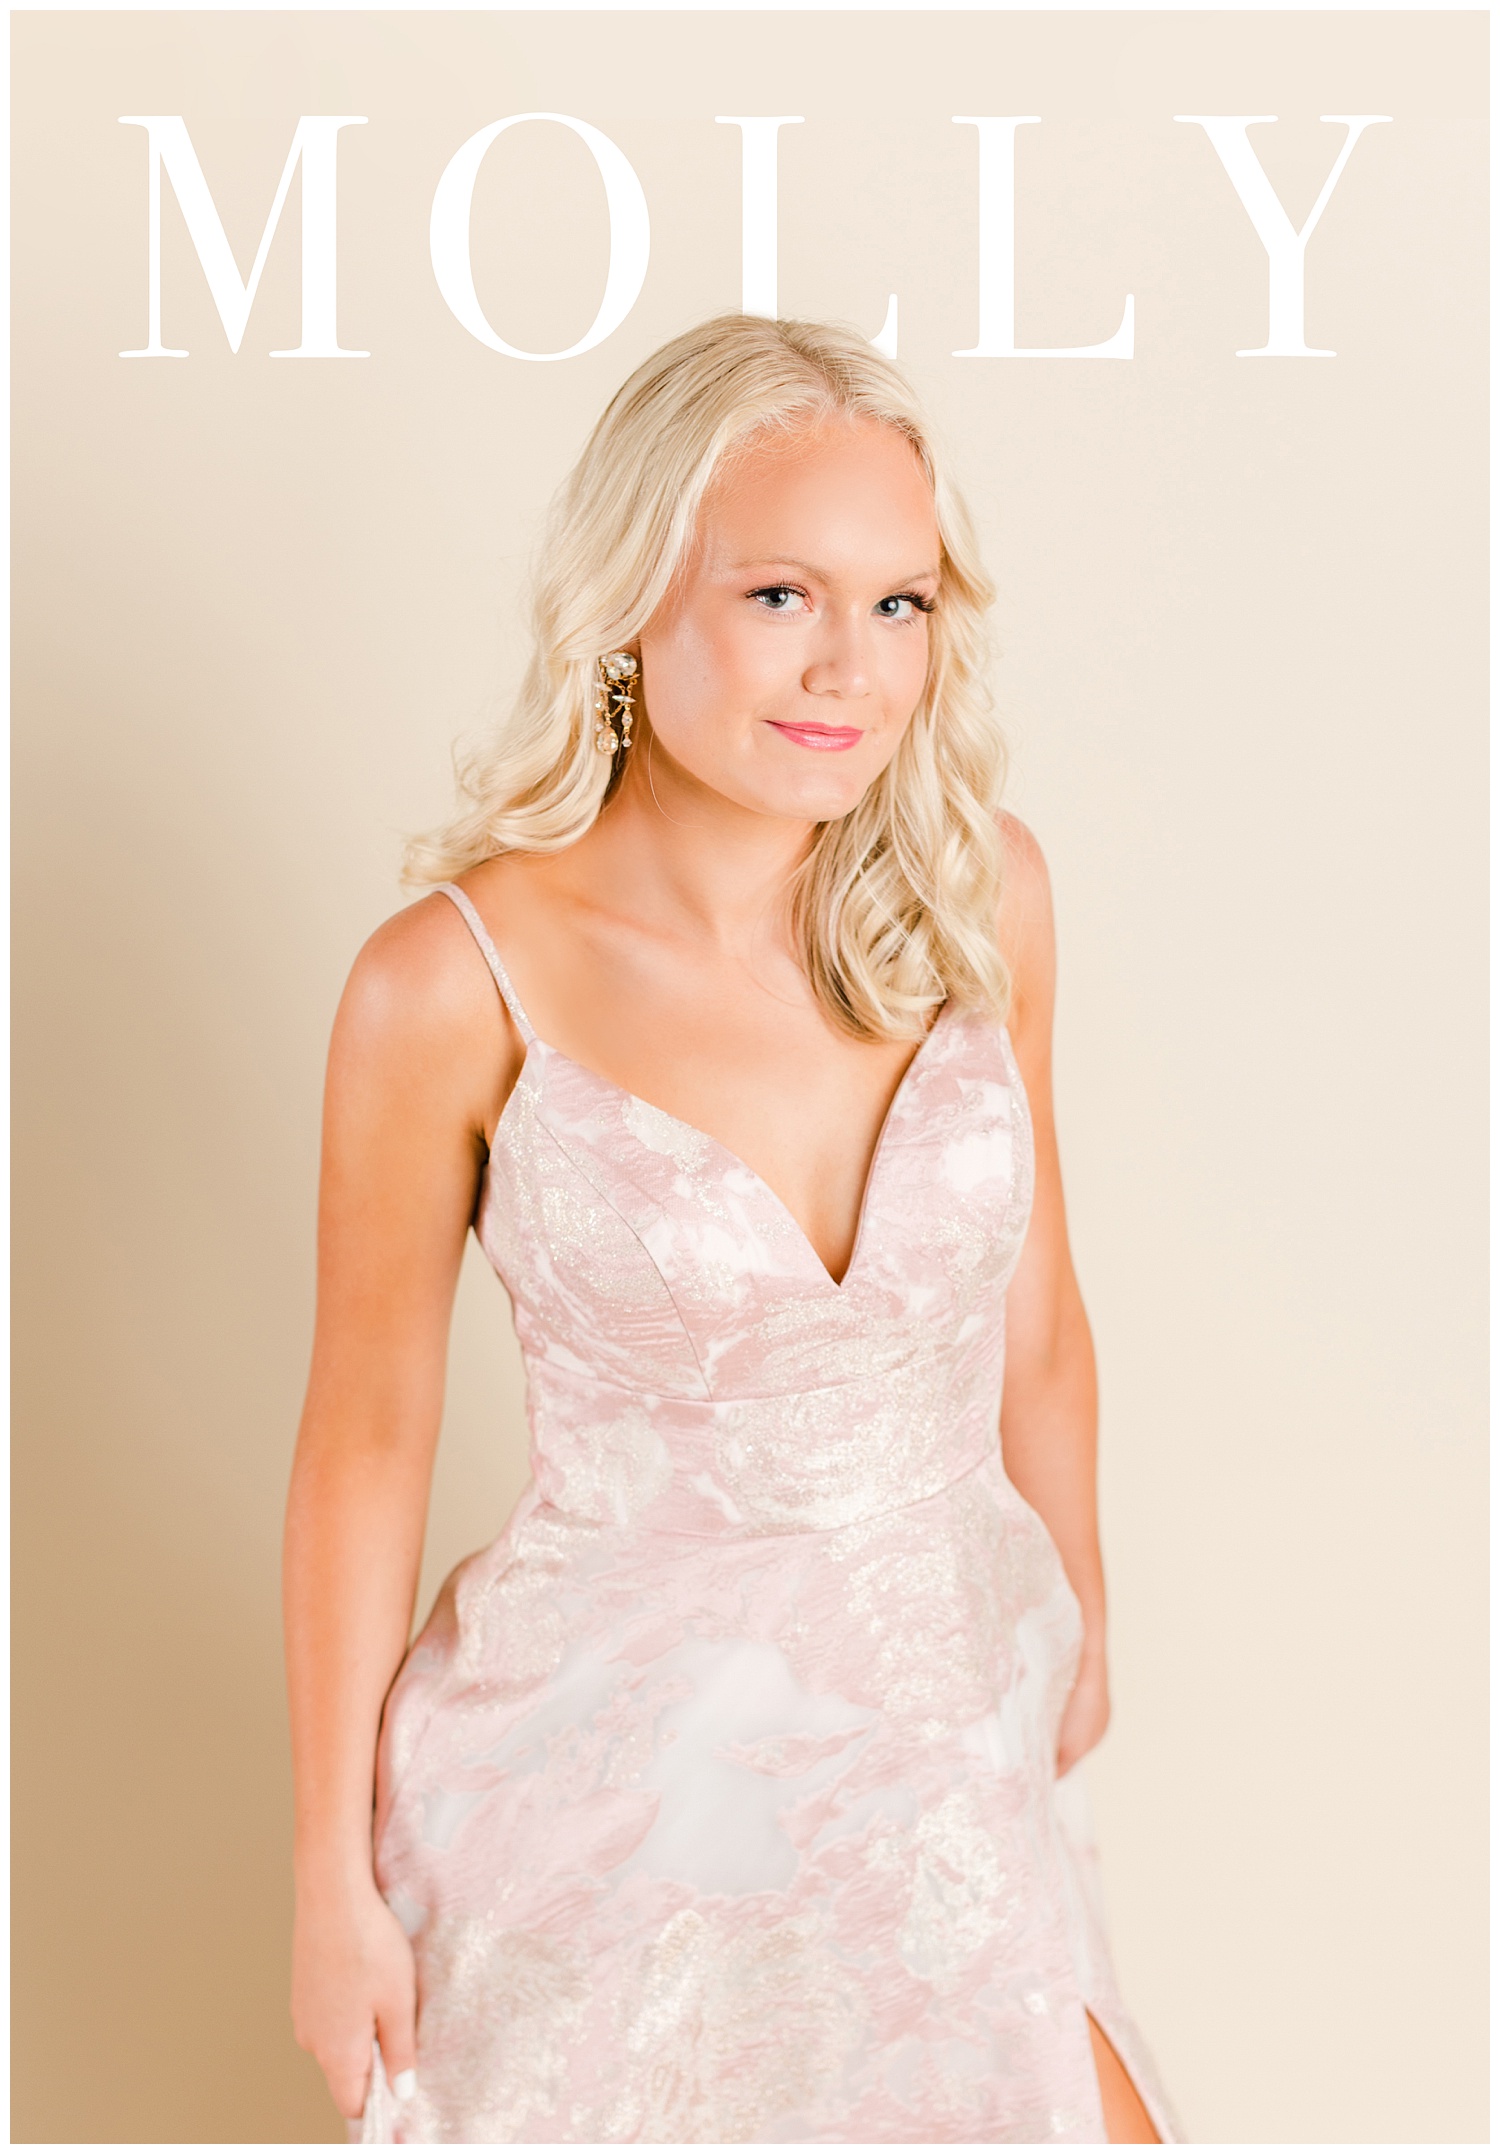 Molly poses in a Colette prom dress for a magazine cover | CB Studio